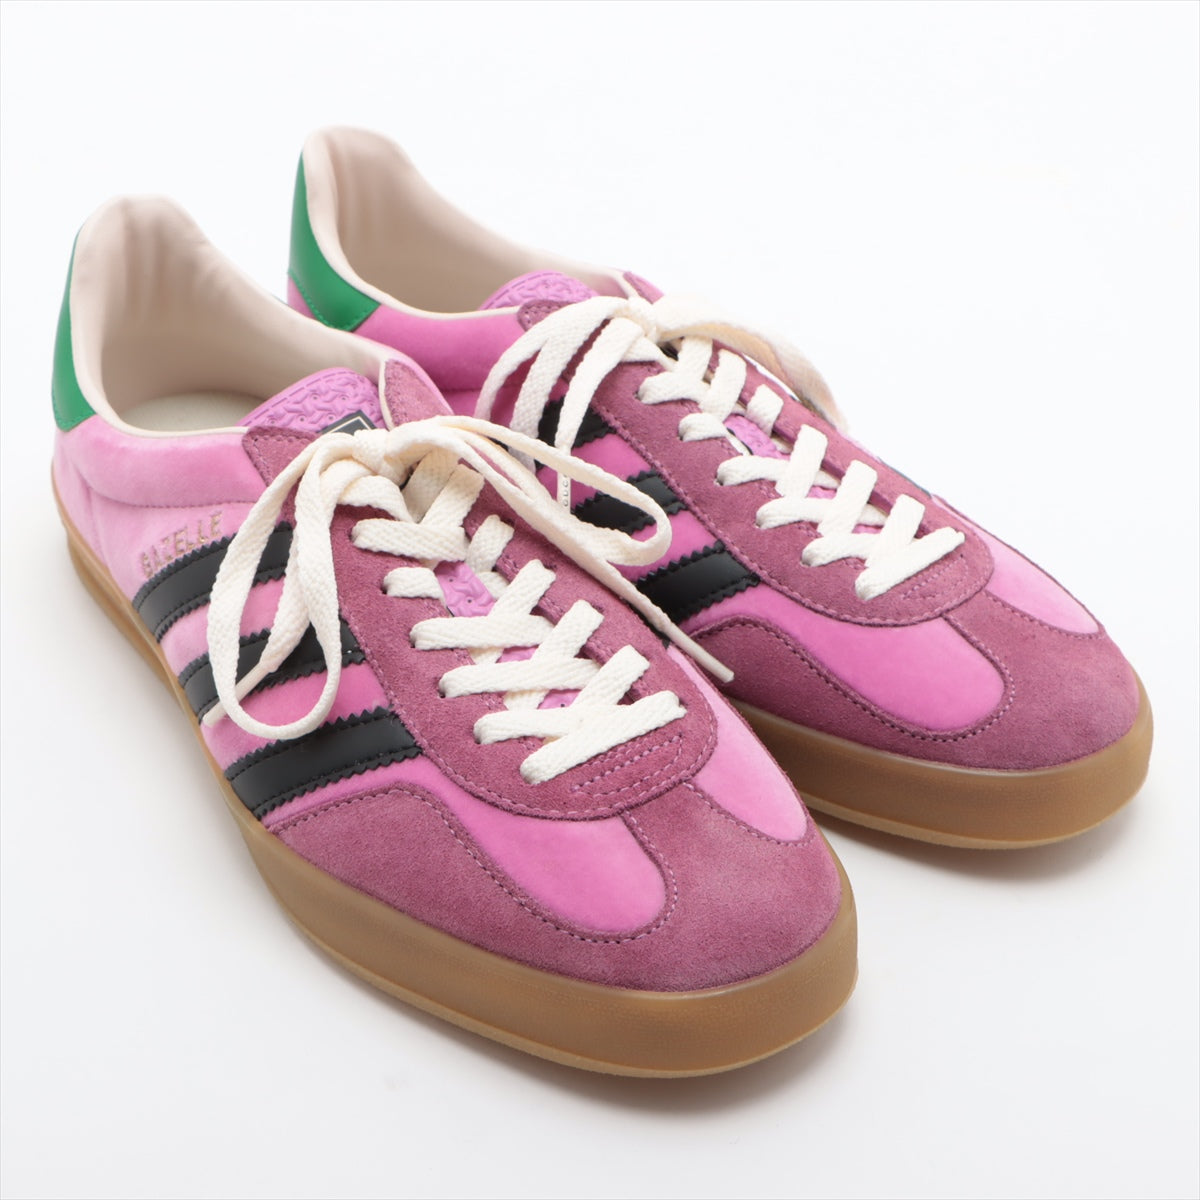 Gucci x adidas Leather & suede Sneakers 27cm Men's Pink HQ8852 Gazelle Is there a replacement string